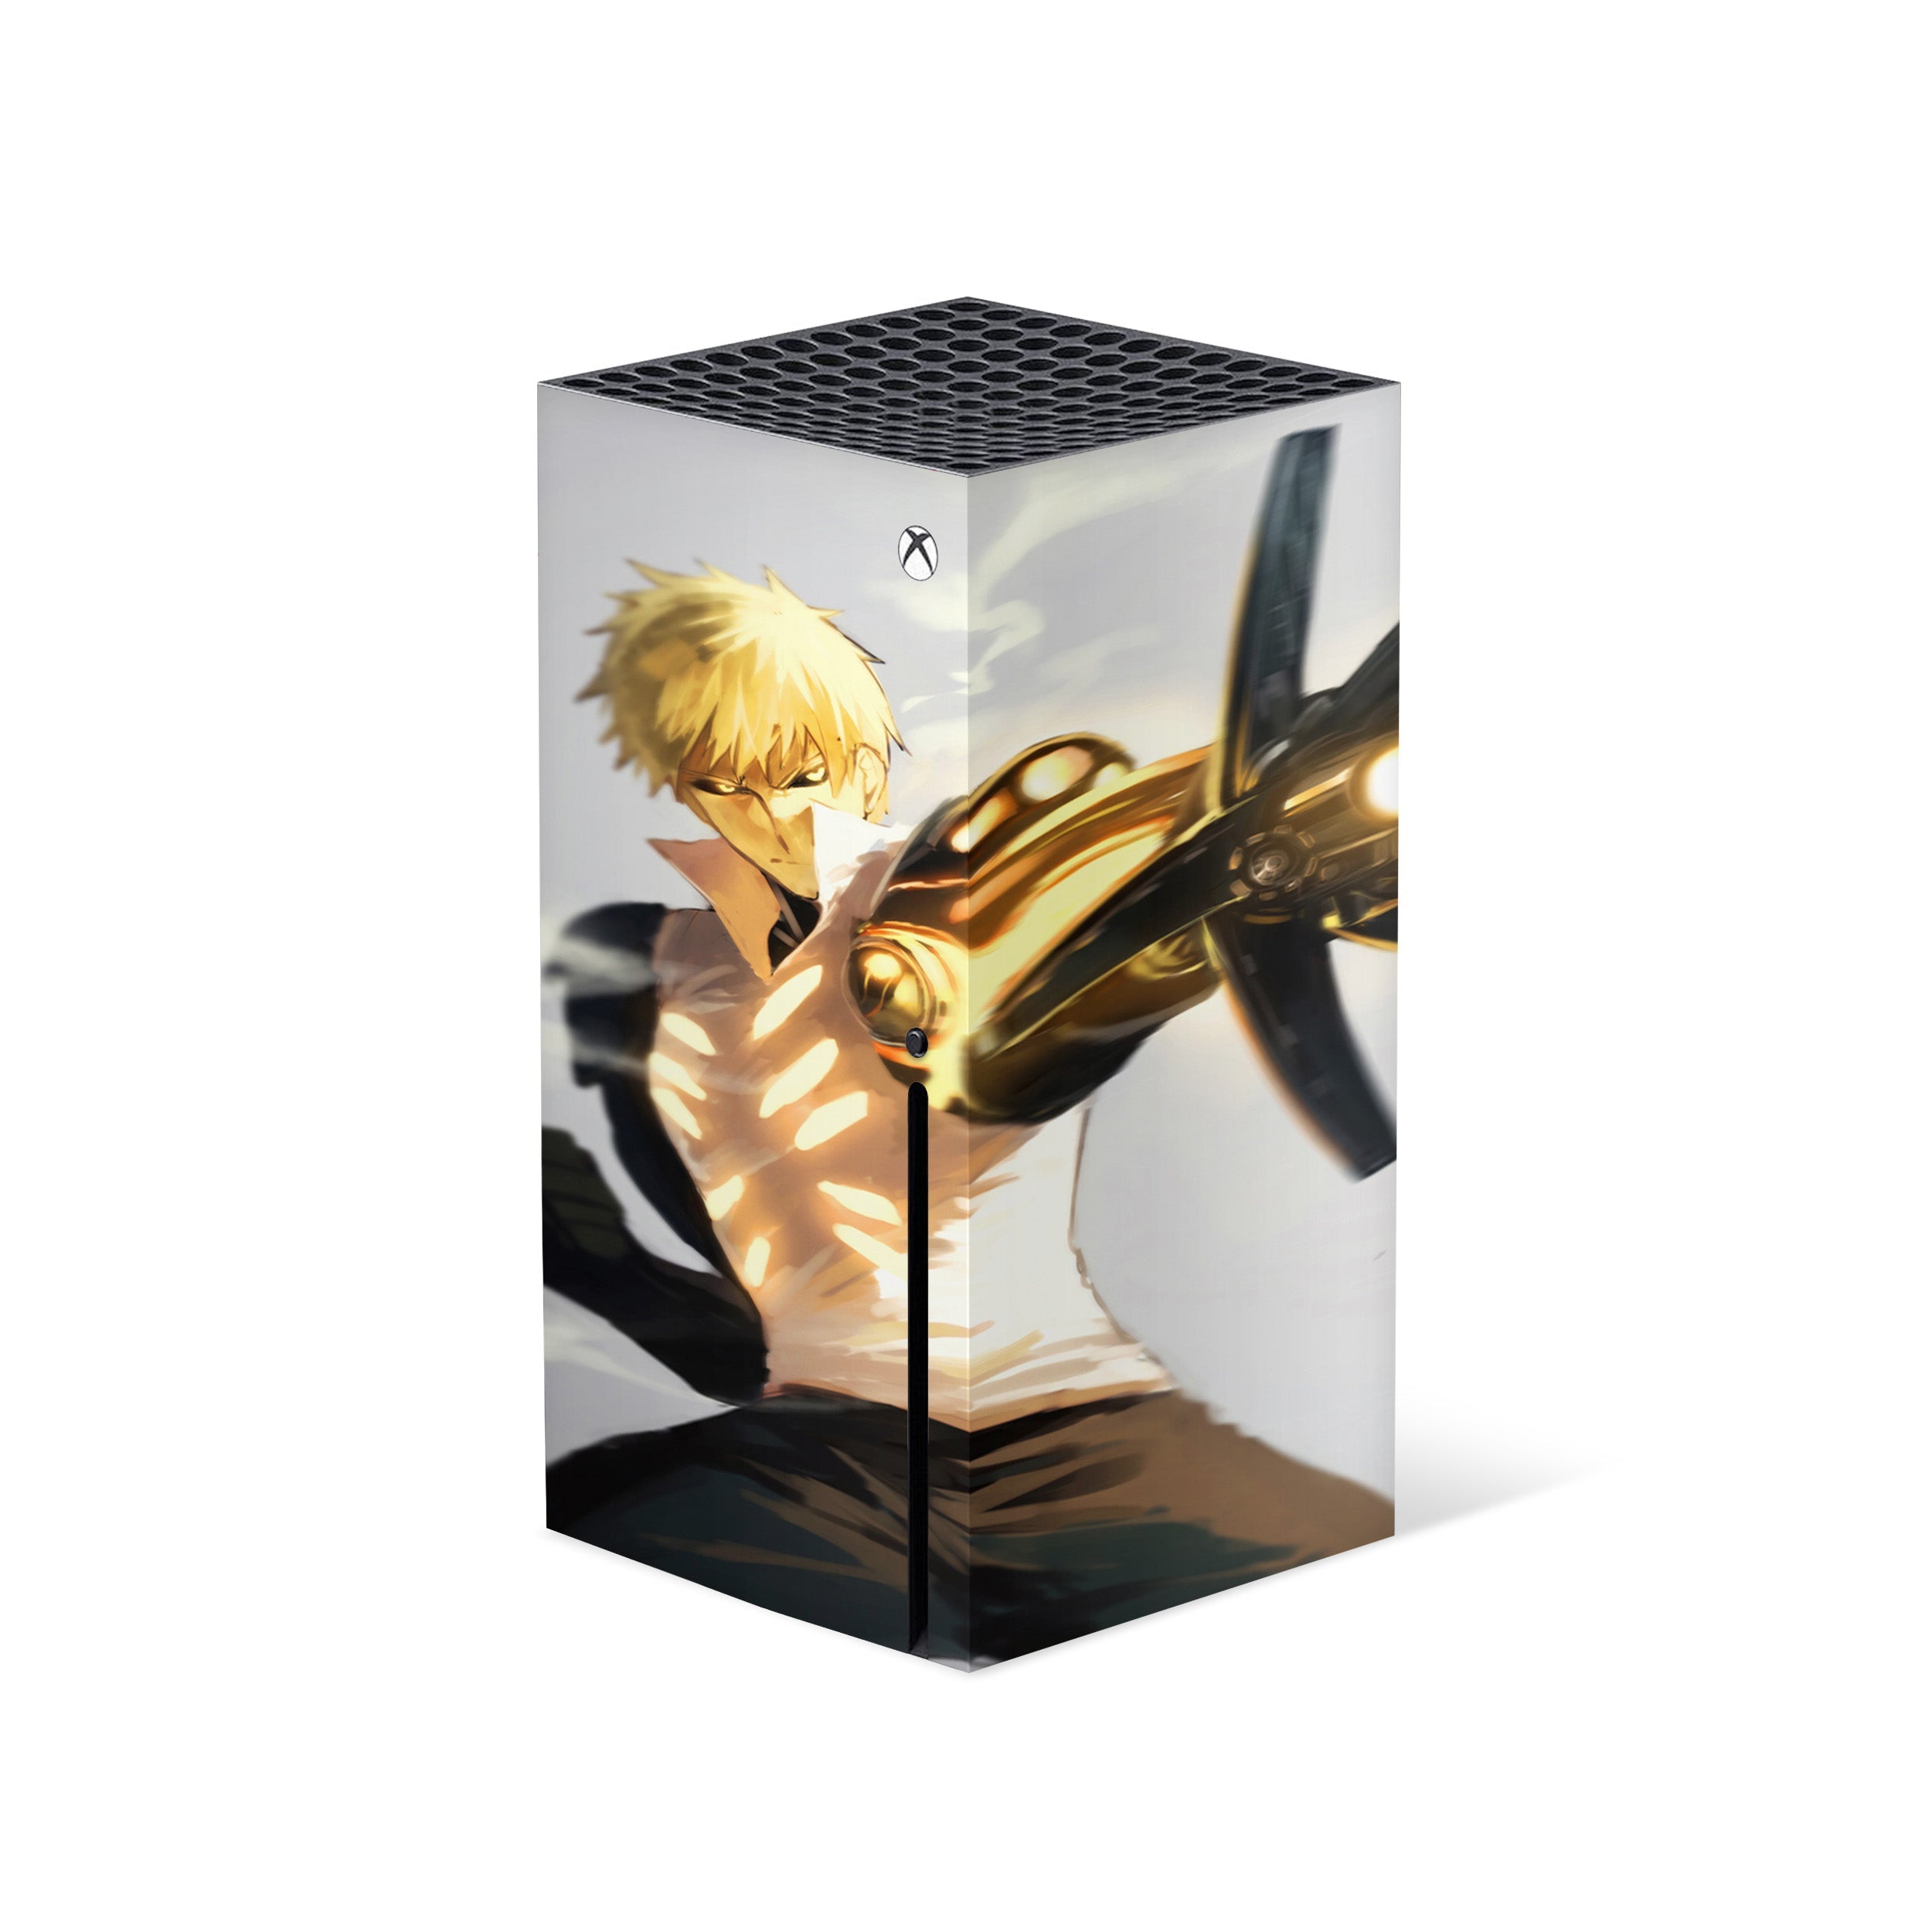 A video game skin featuring a One Punch Man Genos design for the Xbox Series X.